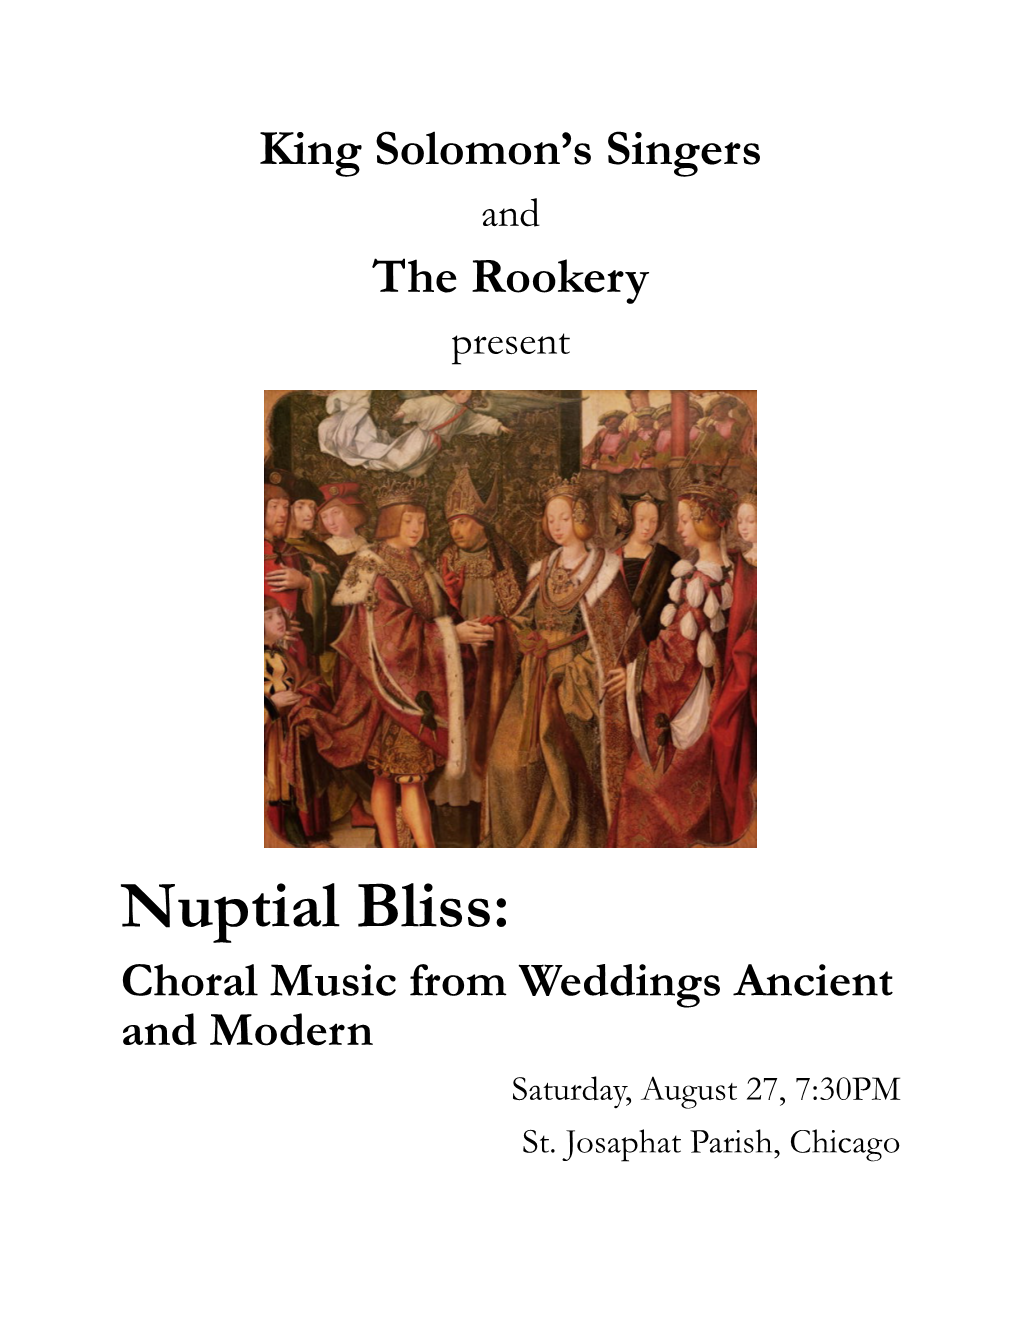 Nuptial Bliss: Choral Music from Weddings Ancient and Modern Saturday, August 27, 7:30PM St